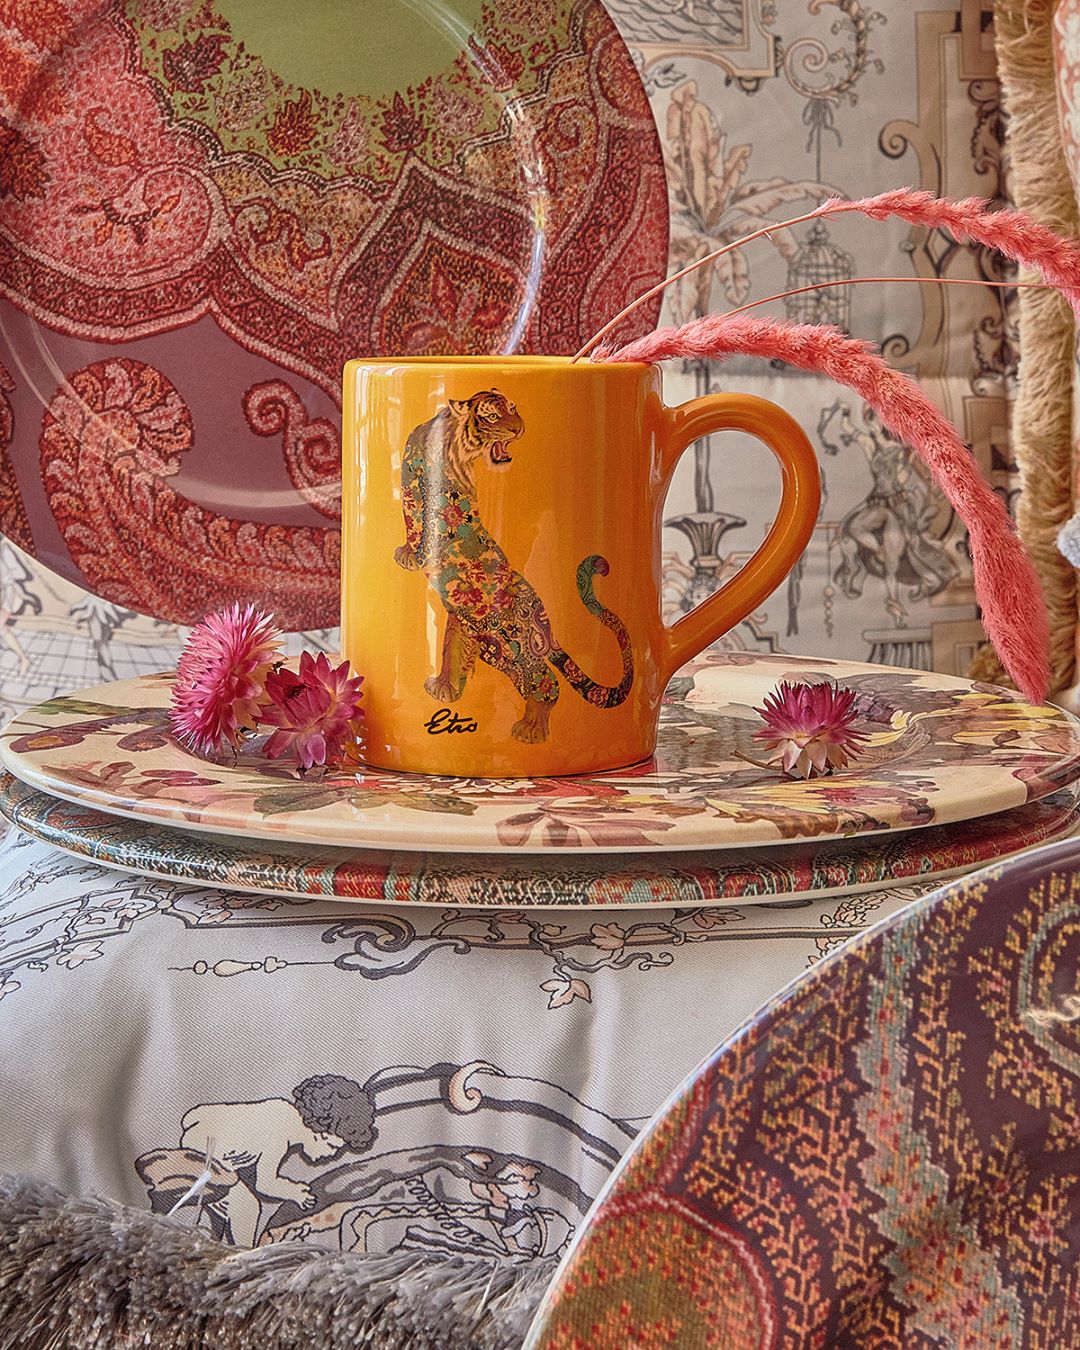 ETRO - Furnish every corner of your home with ETRO style.⁣
Discover the latest #ETROhome collection in selected stores worldwide.⁣
#ETRO